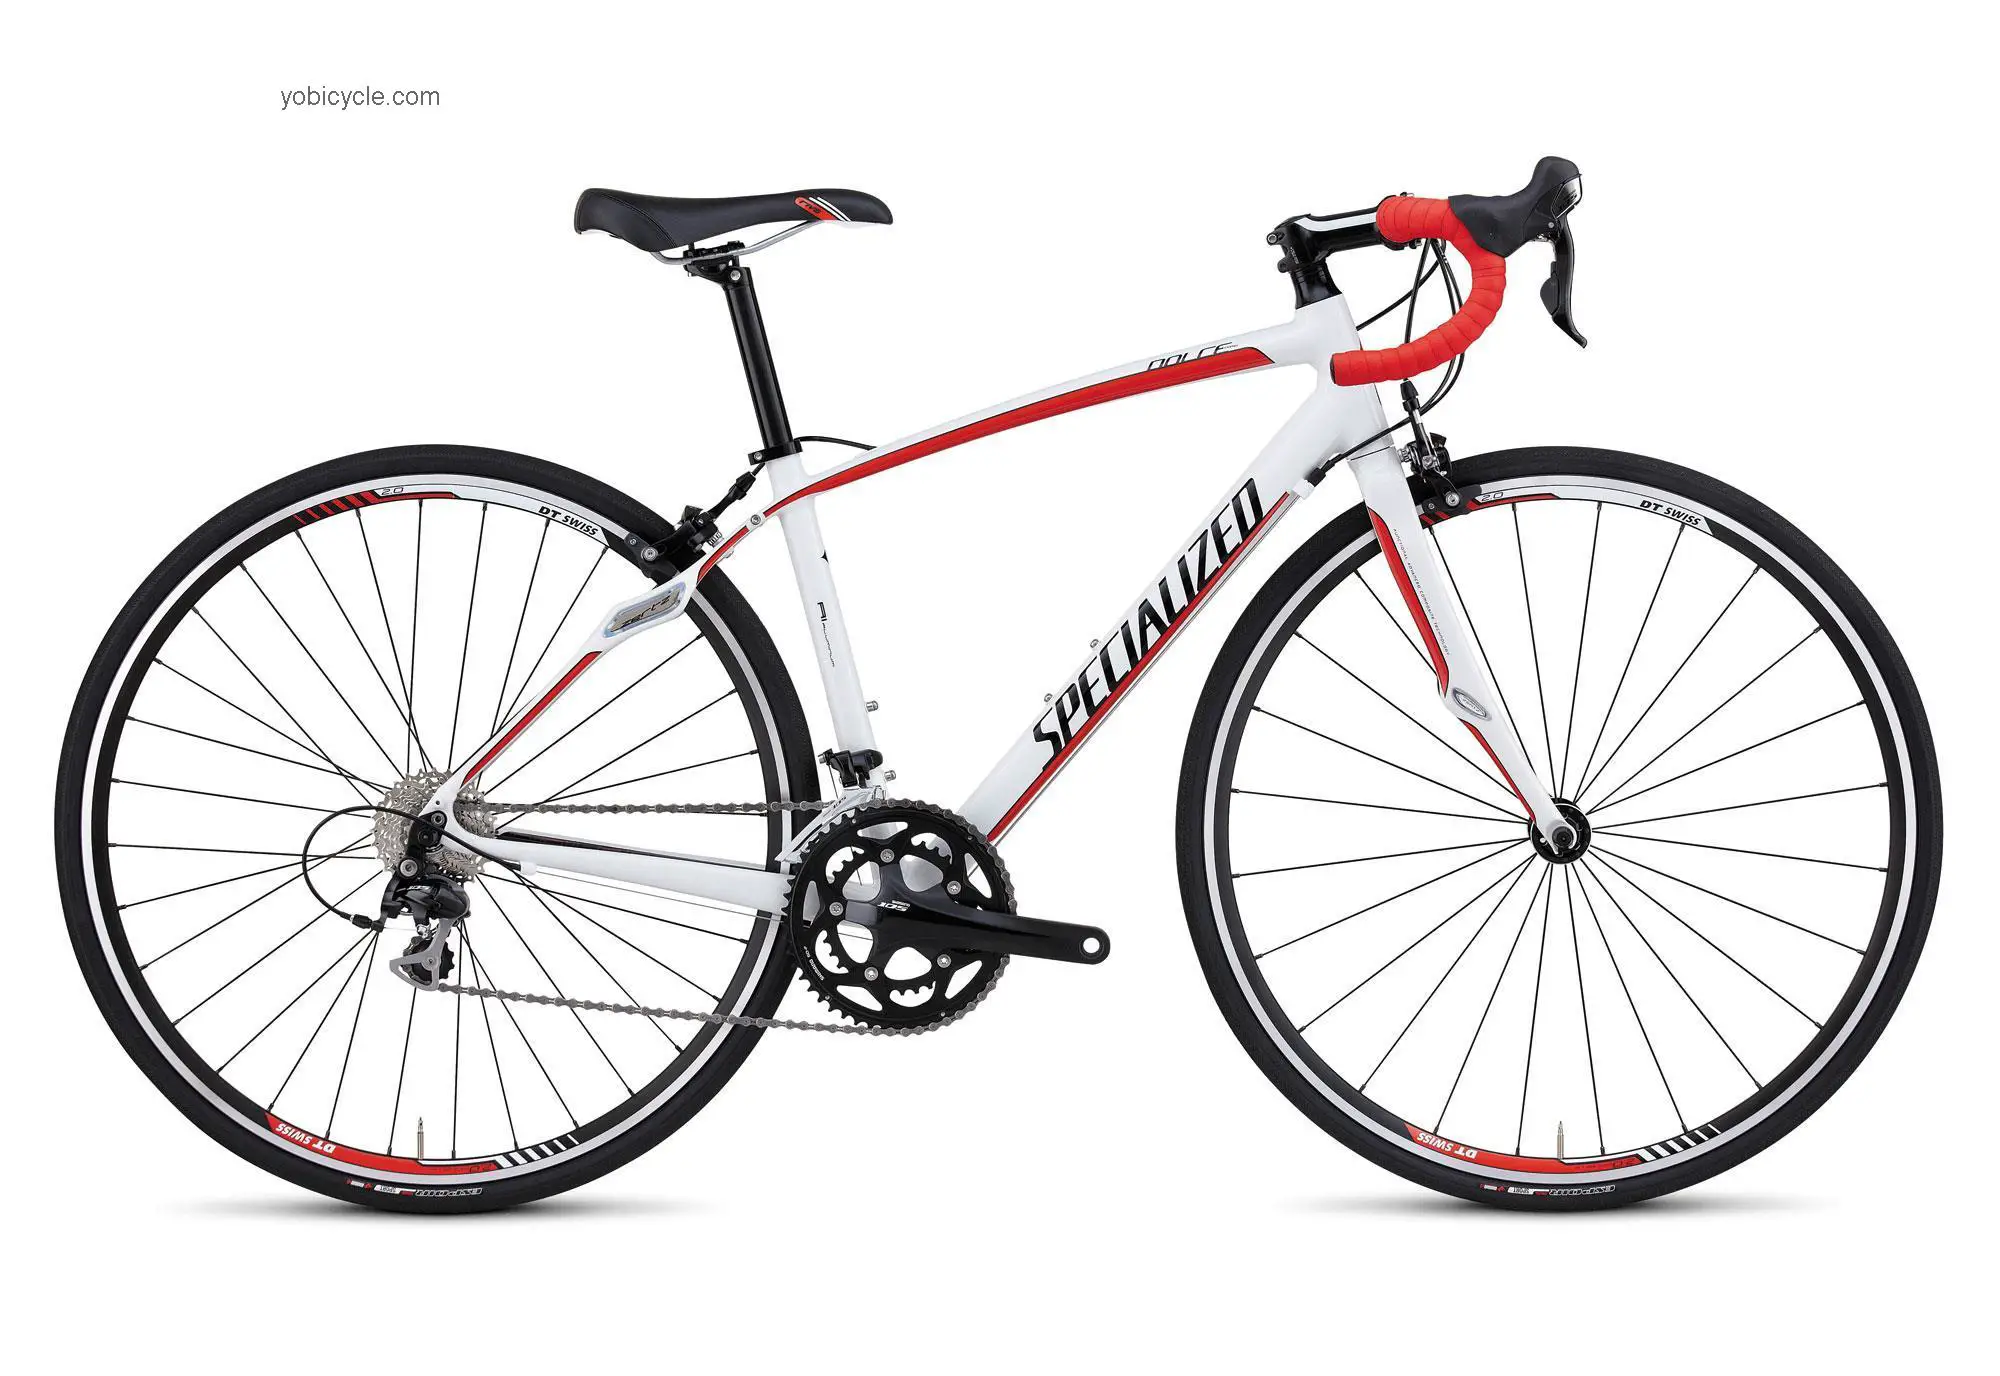 Specialized Dolce Comp Compact 2012 comparison online with competitors